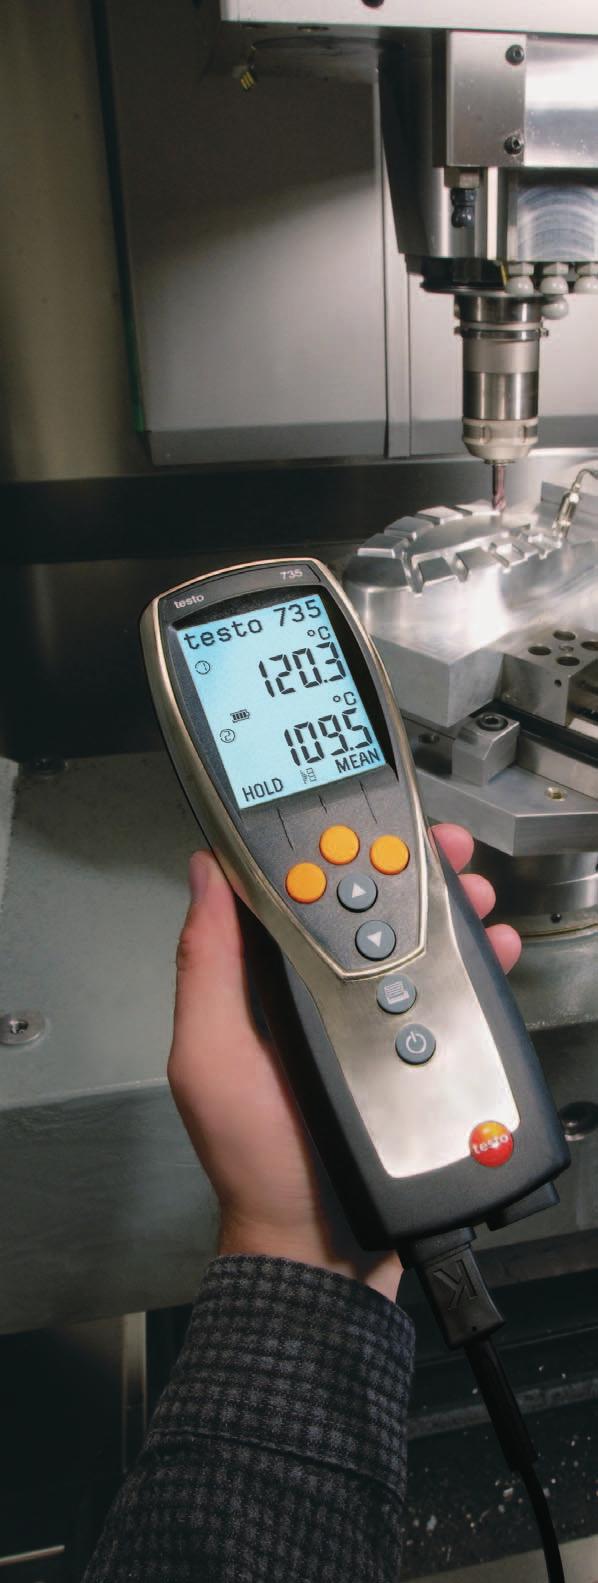 14 testo 735, highly accurate alarm and